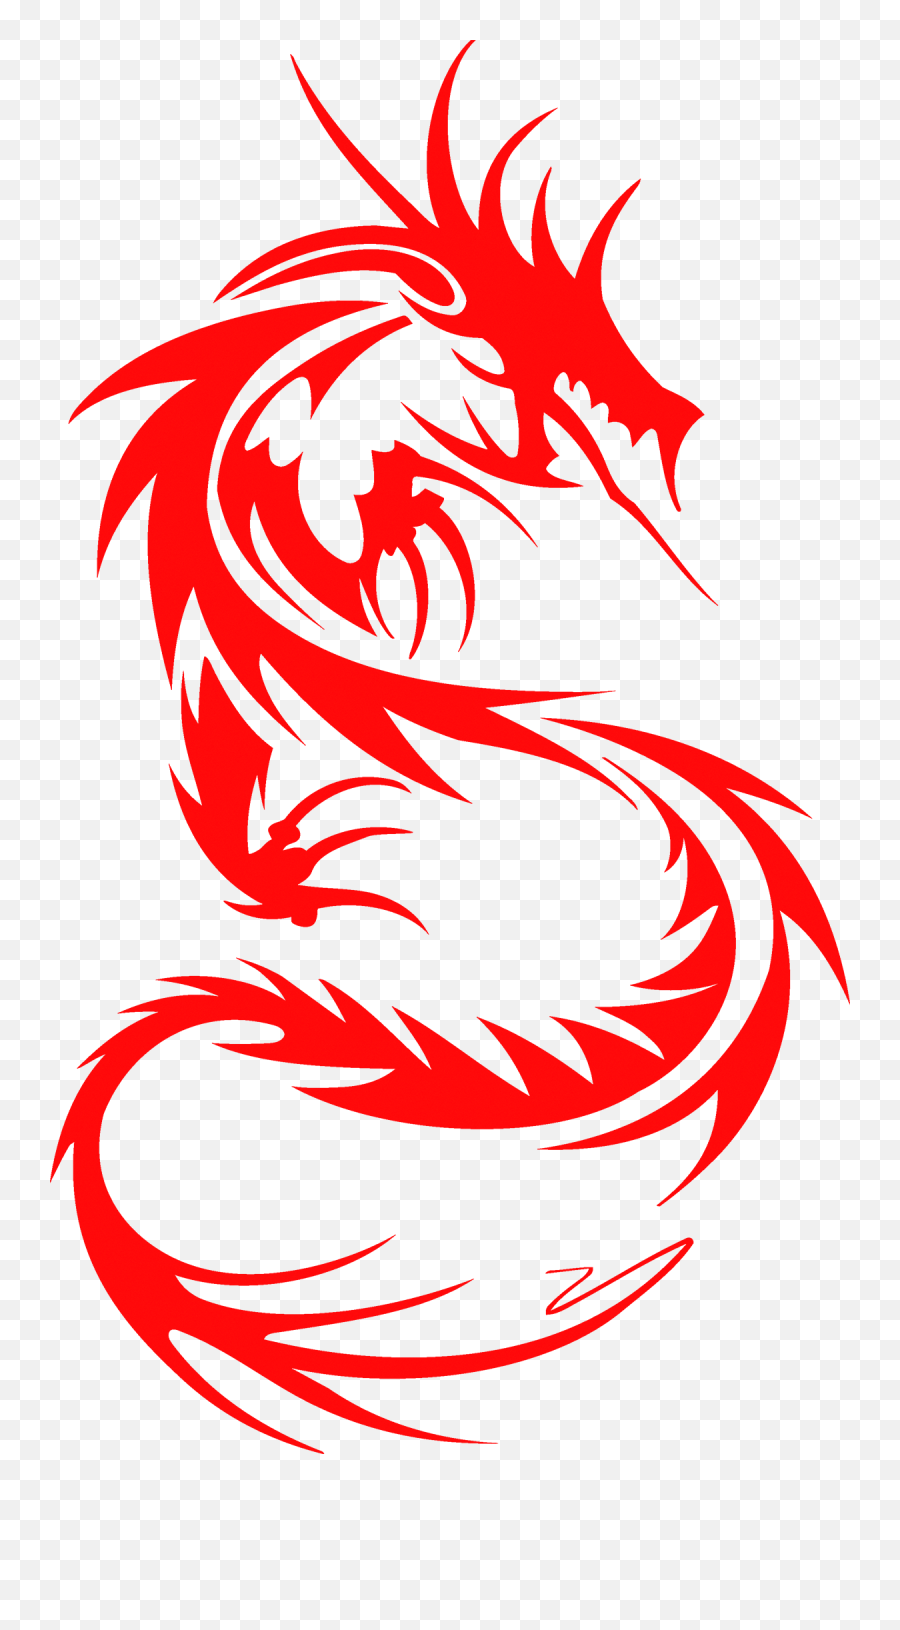 Paper Cut Tattoo Sleeve Chinese Dragon - Japanese Transparent Red Dragon Emoji,Tattoo Sleeve Png